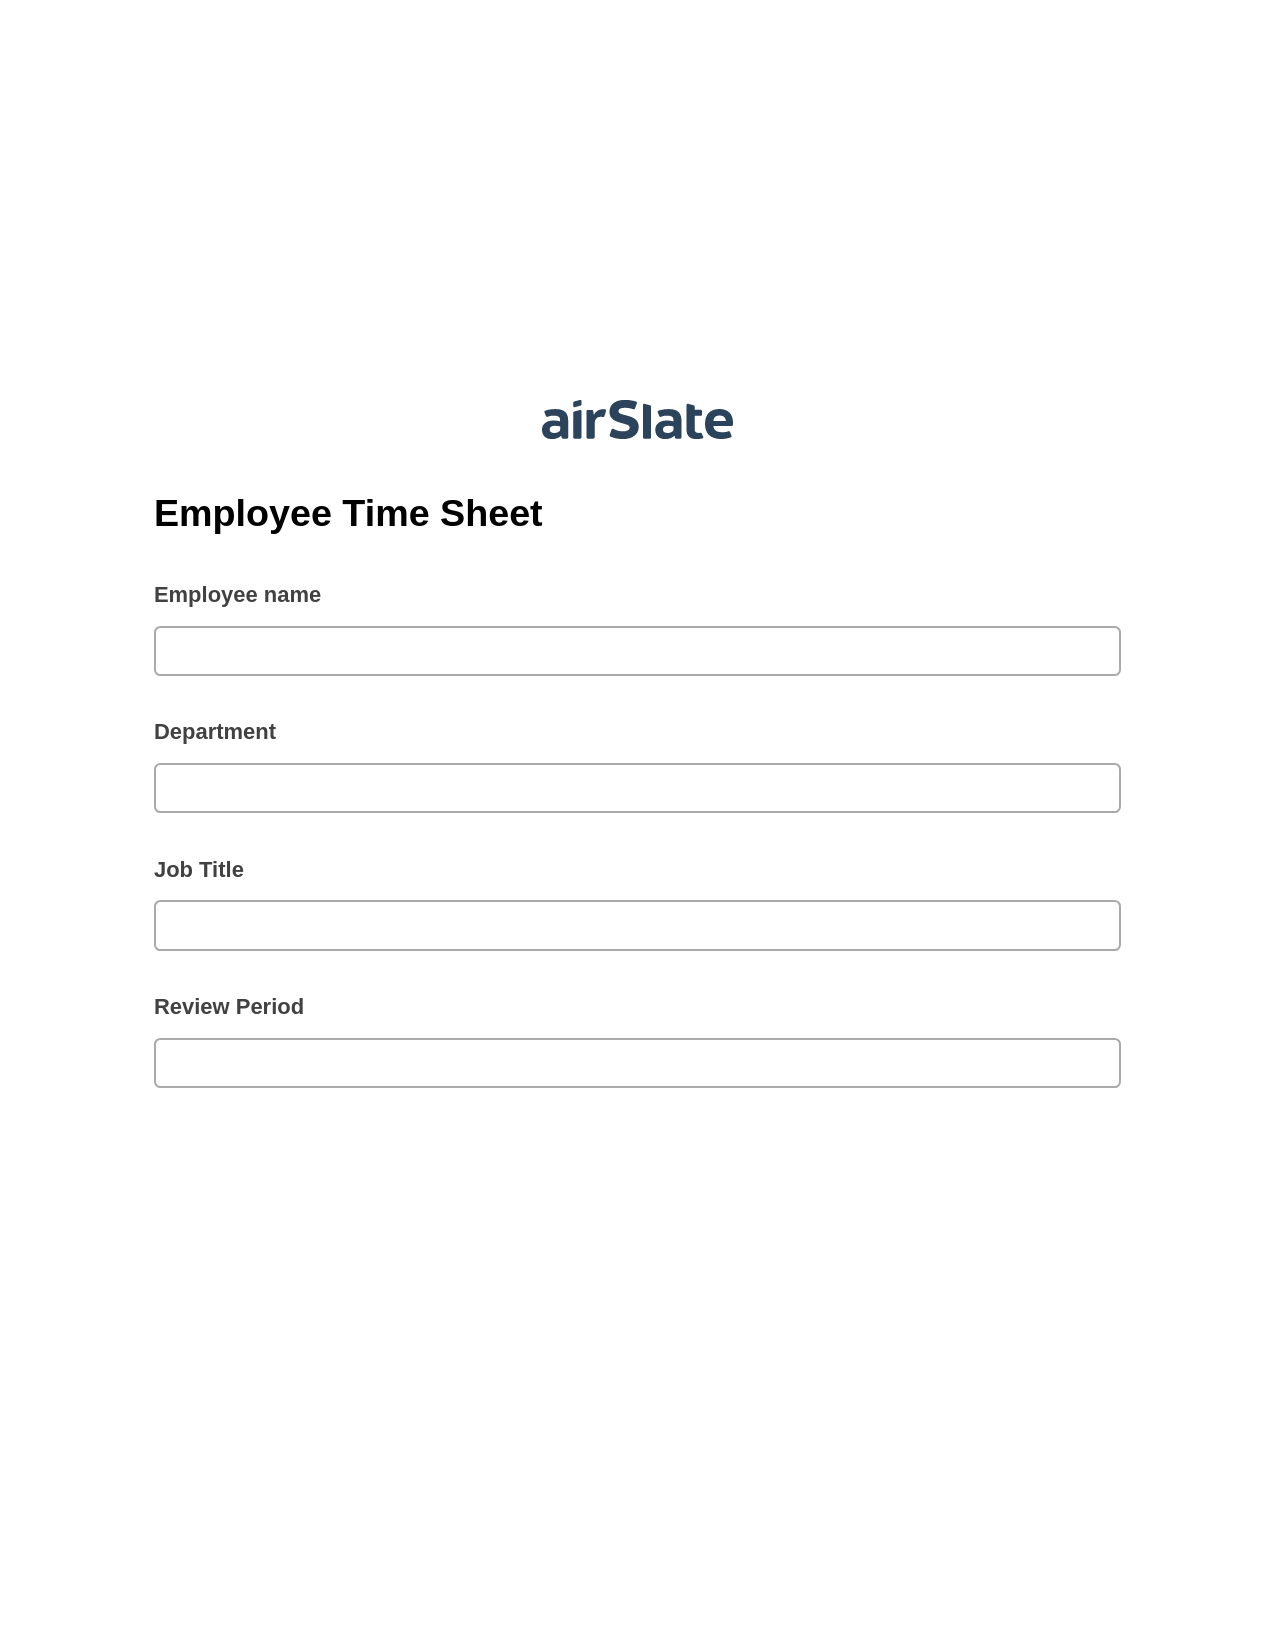 Employee Time Sheet Pre-fill from MS Dynamics 365 Records, Update Audit Trail Bot, Export to MySQL Bot